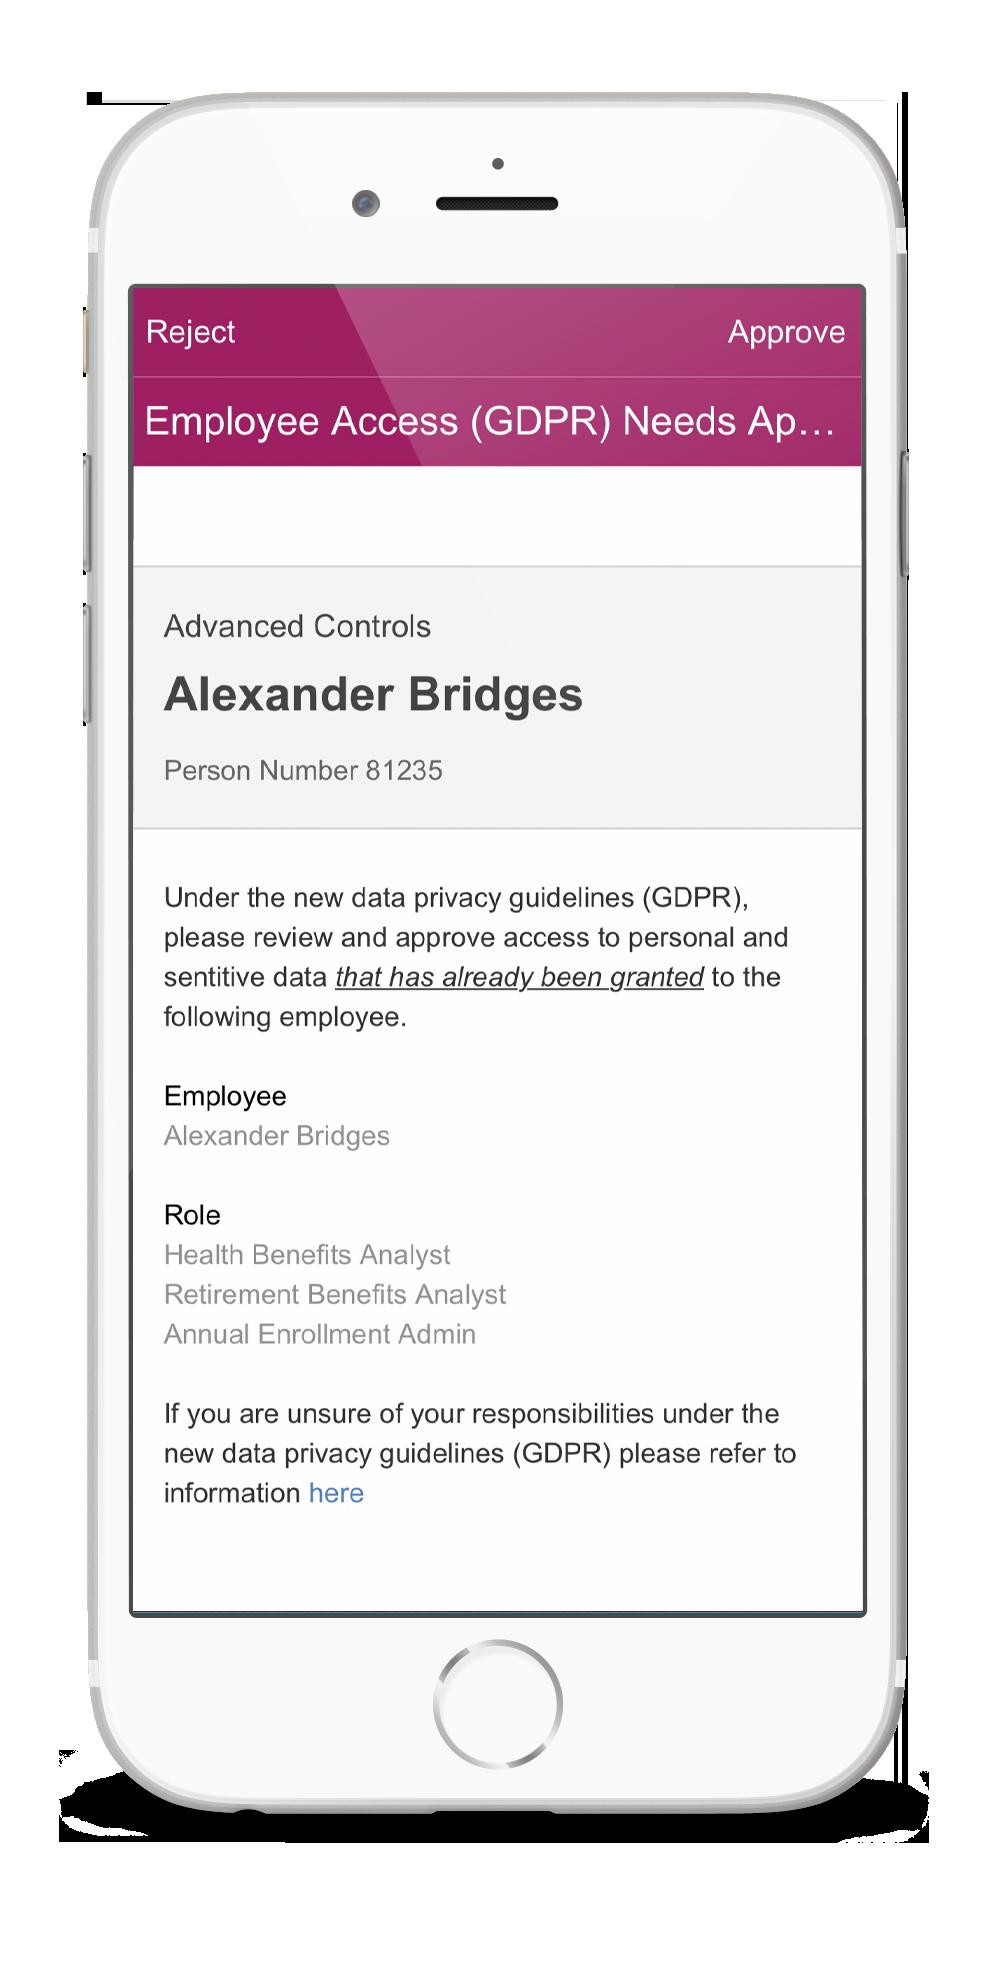 MITIGATE RISK WITH ADVANCED HCM CONTROLS The AI-driven solution audits employee access and activity to monitor for fraud and add security controls.